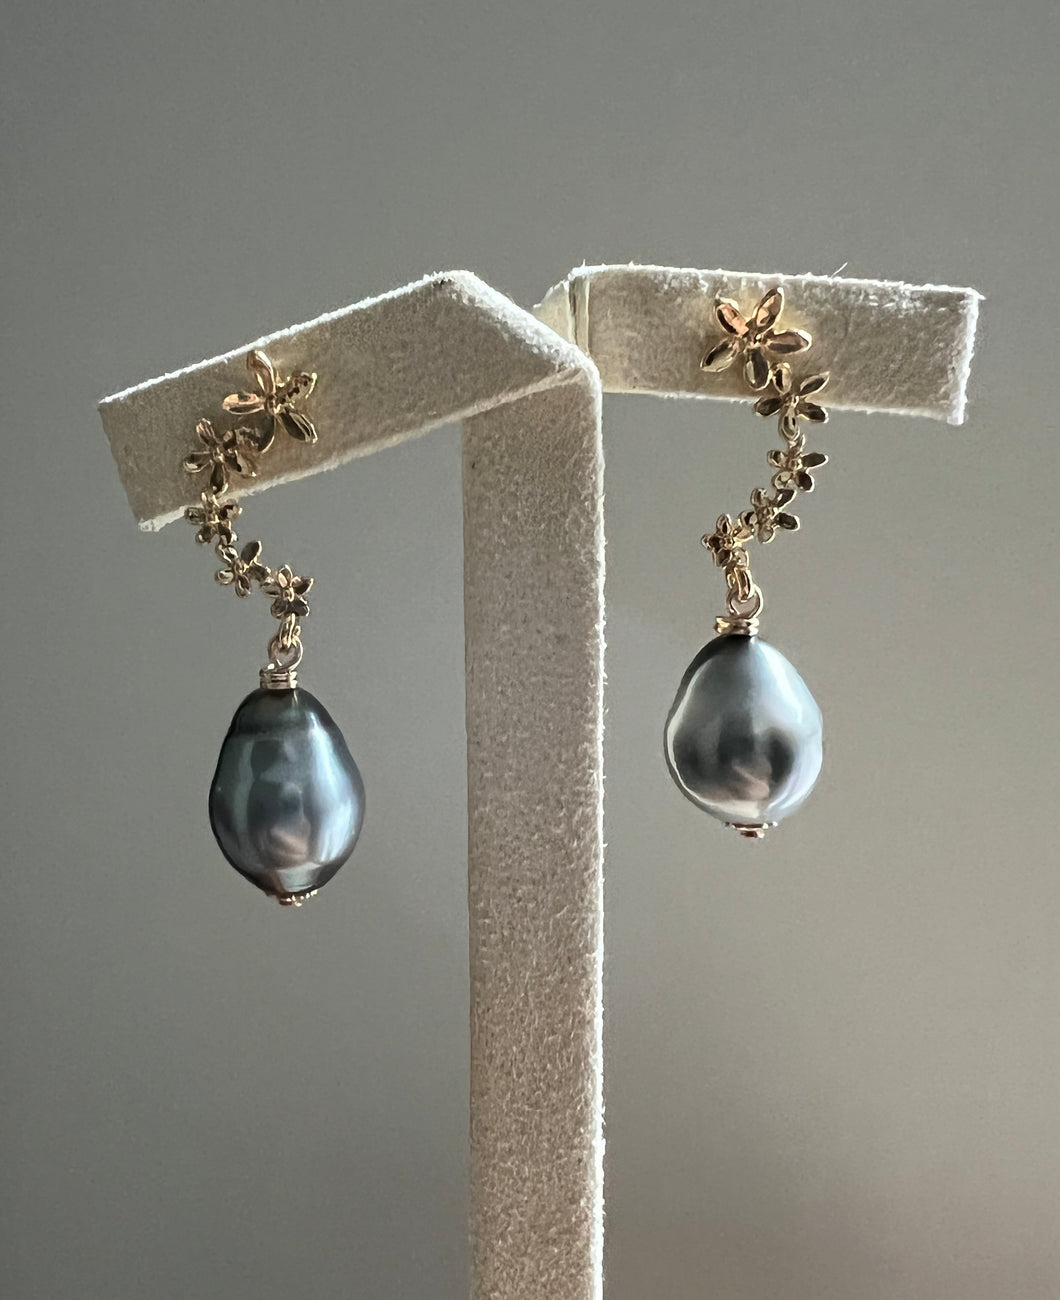 Silver Grey Tahitian Pearls on Cascading Floral Studs